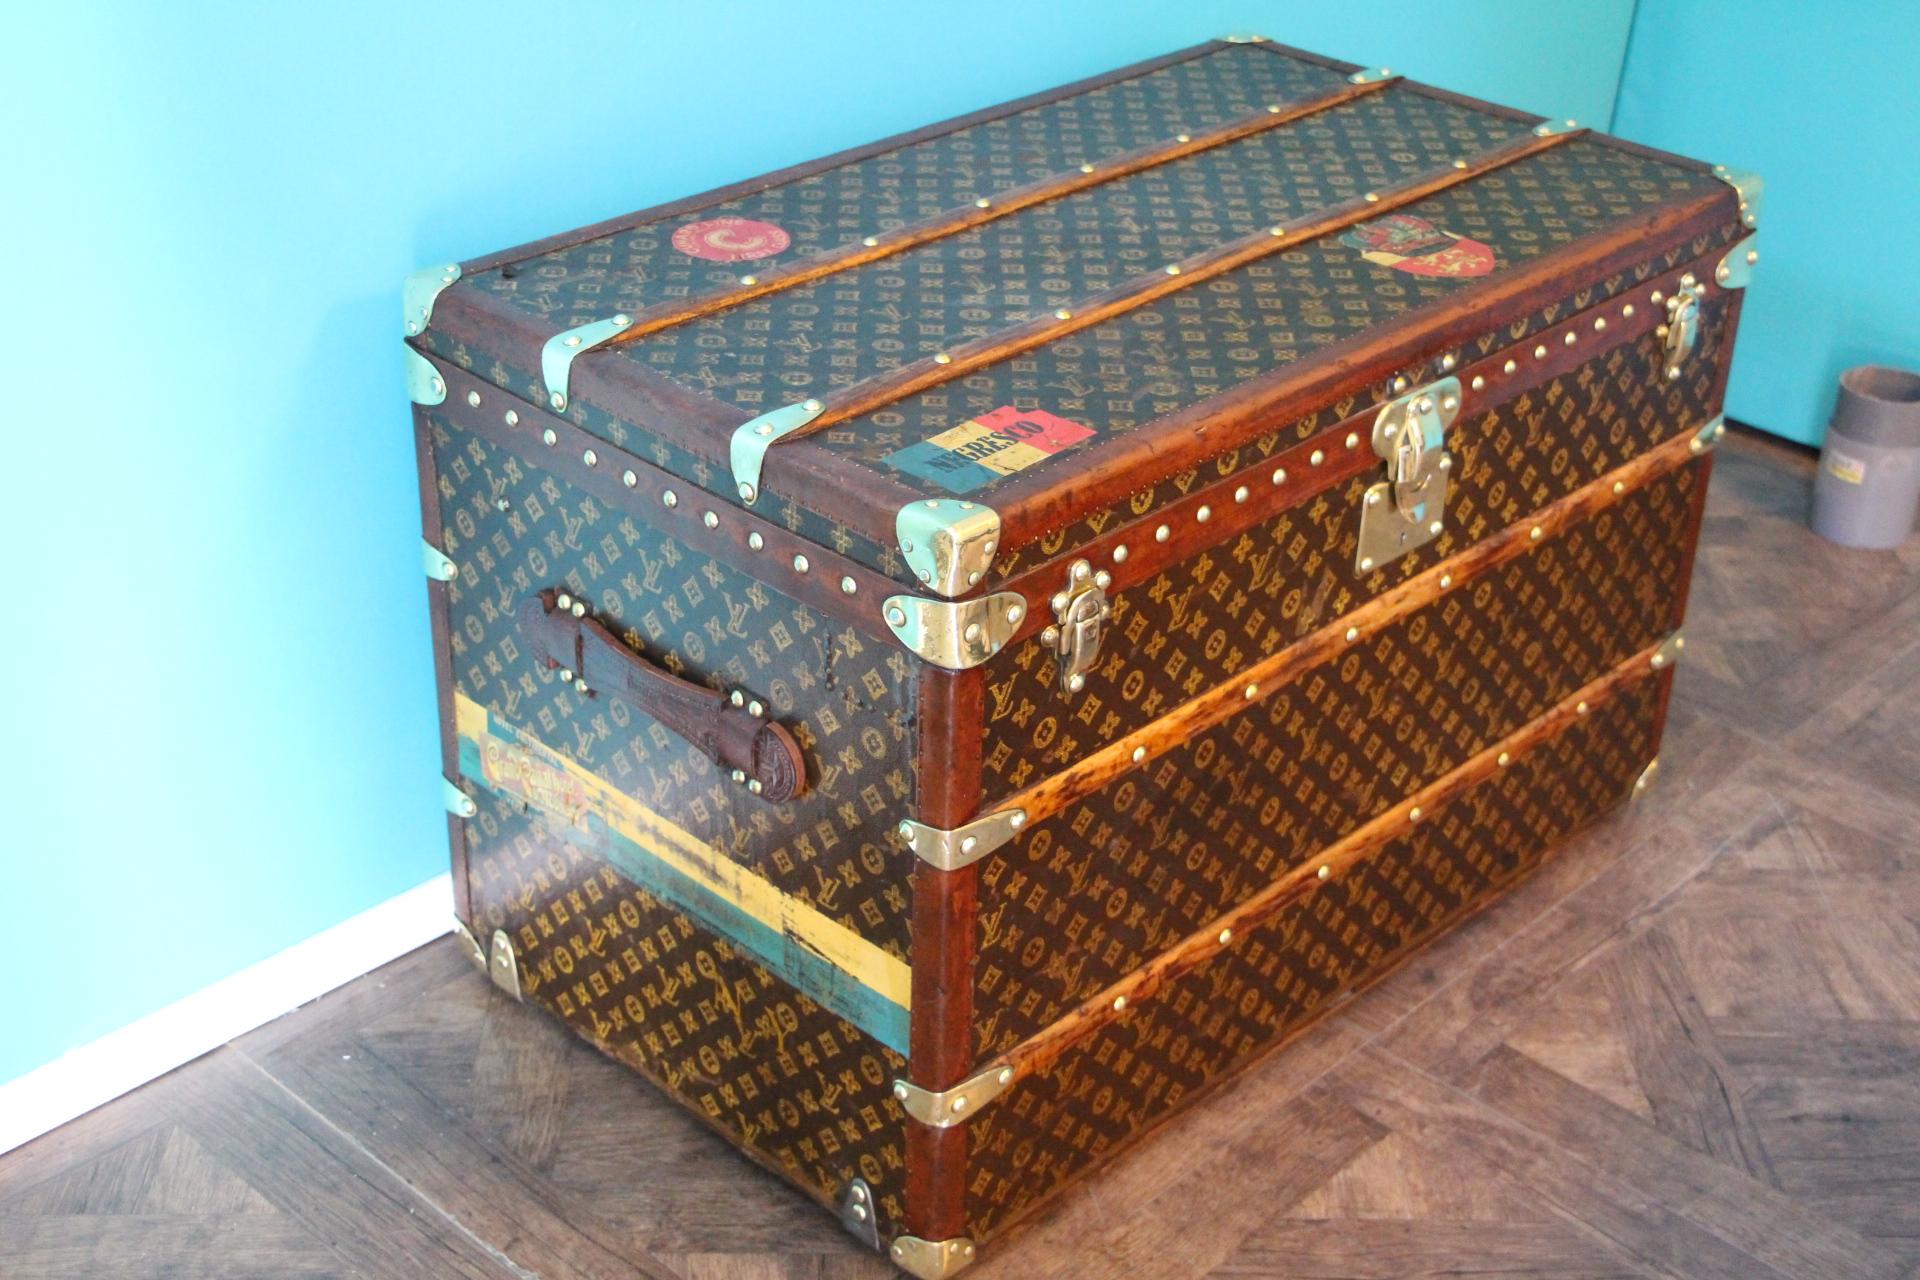 This beautiful Louis Vuitton trunk is all stenciled LV monogram canvas, with all Louis Vuitton stamped brass hardware and lozine trim. It features large leather side handles as well as customized painted stripes on each side as well as couple of